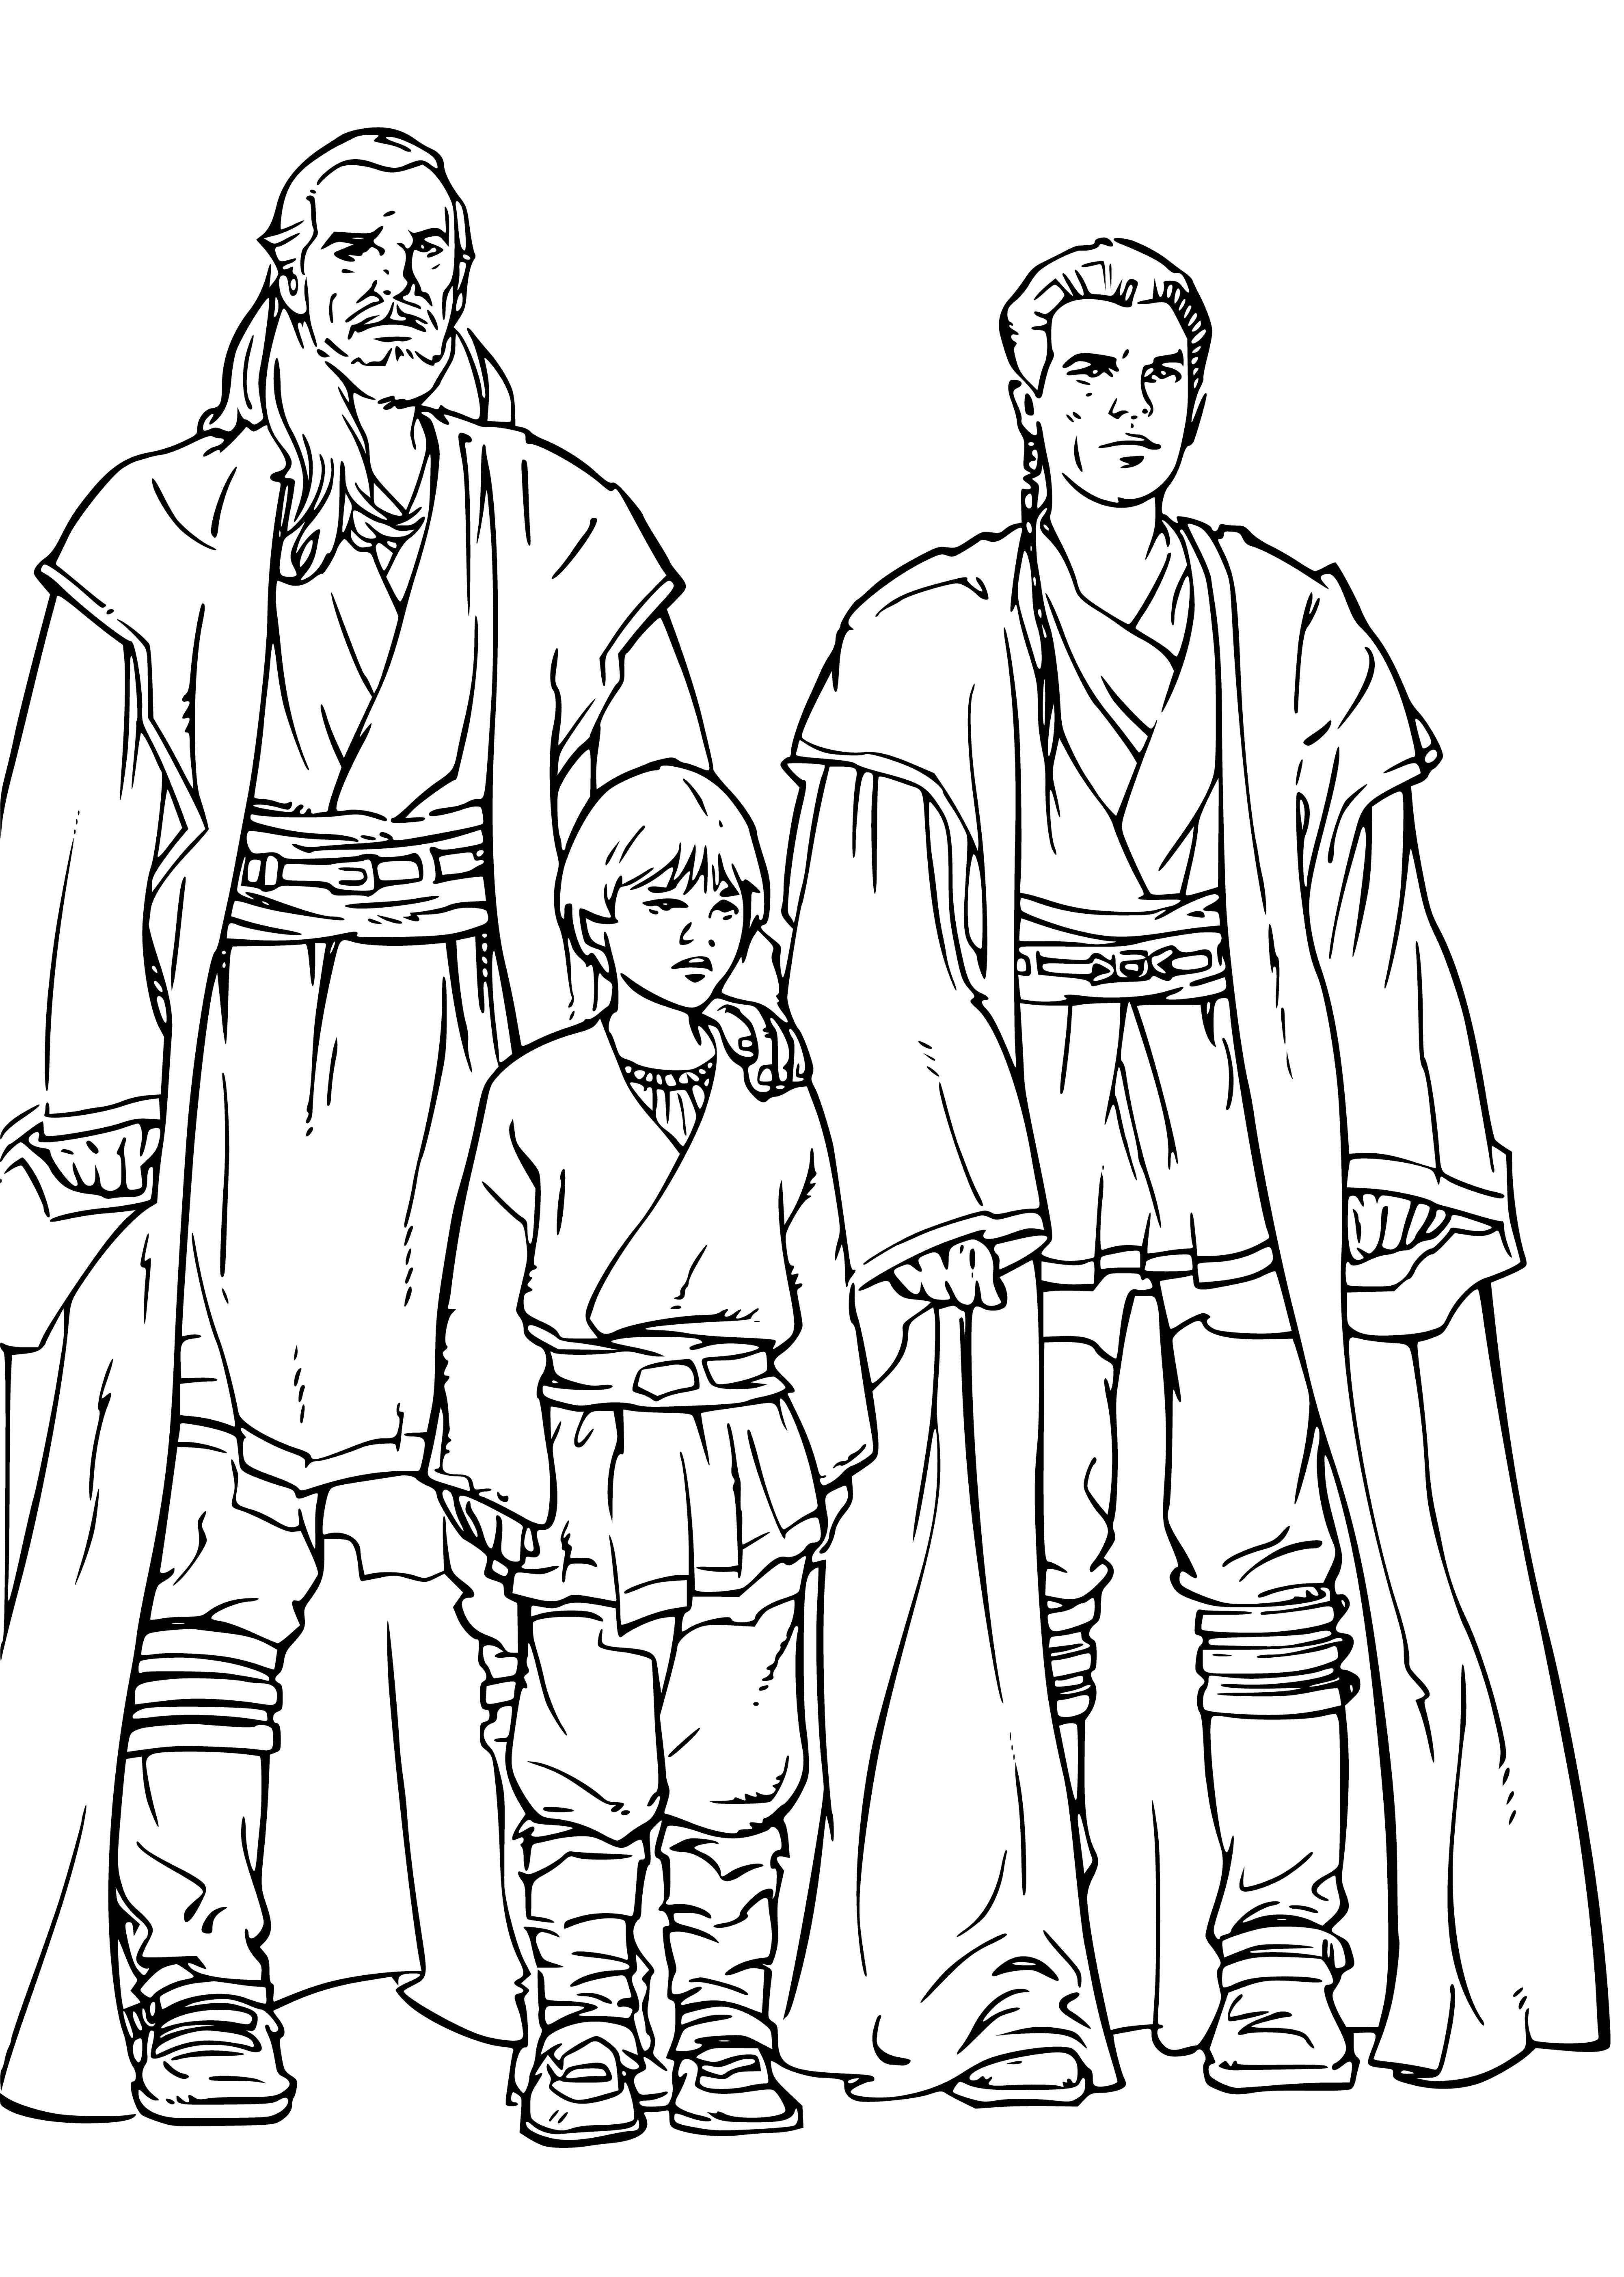 Jedi and Skywalker coloring page